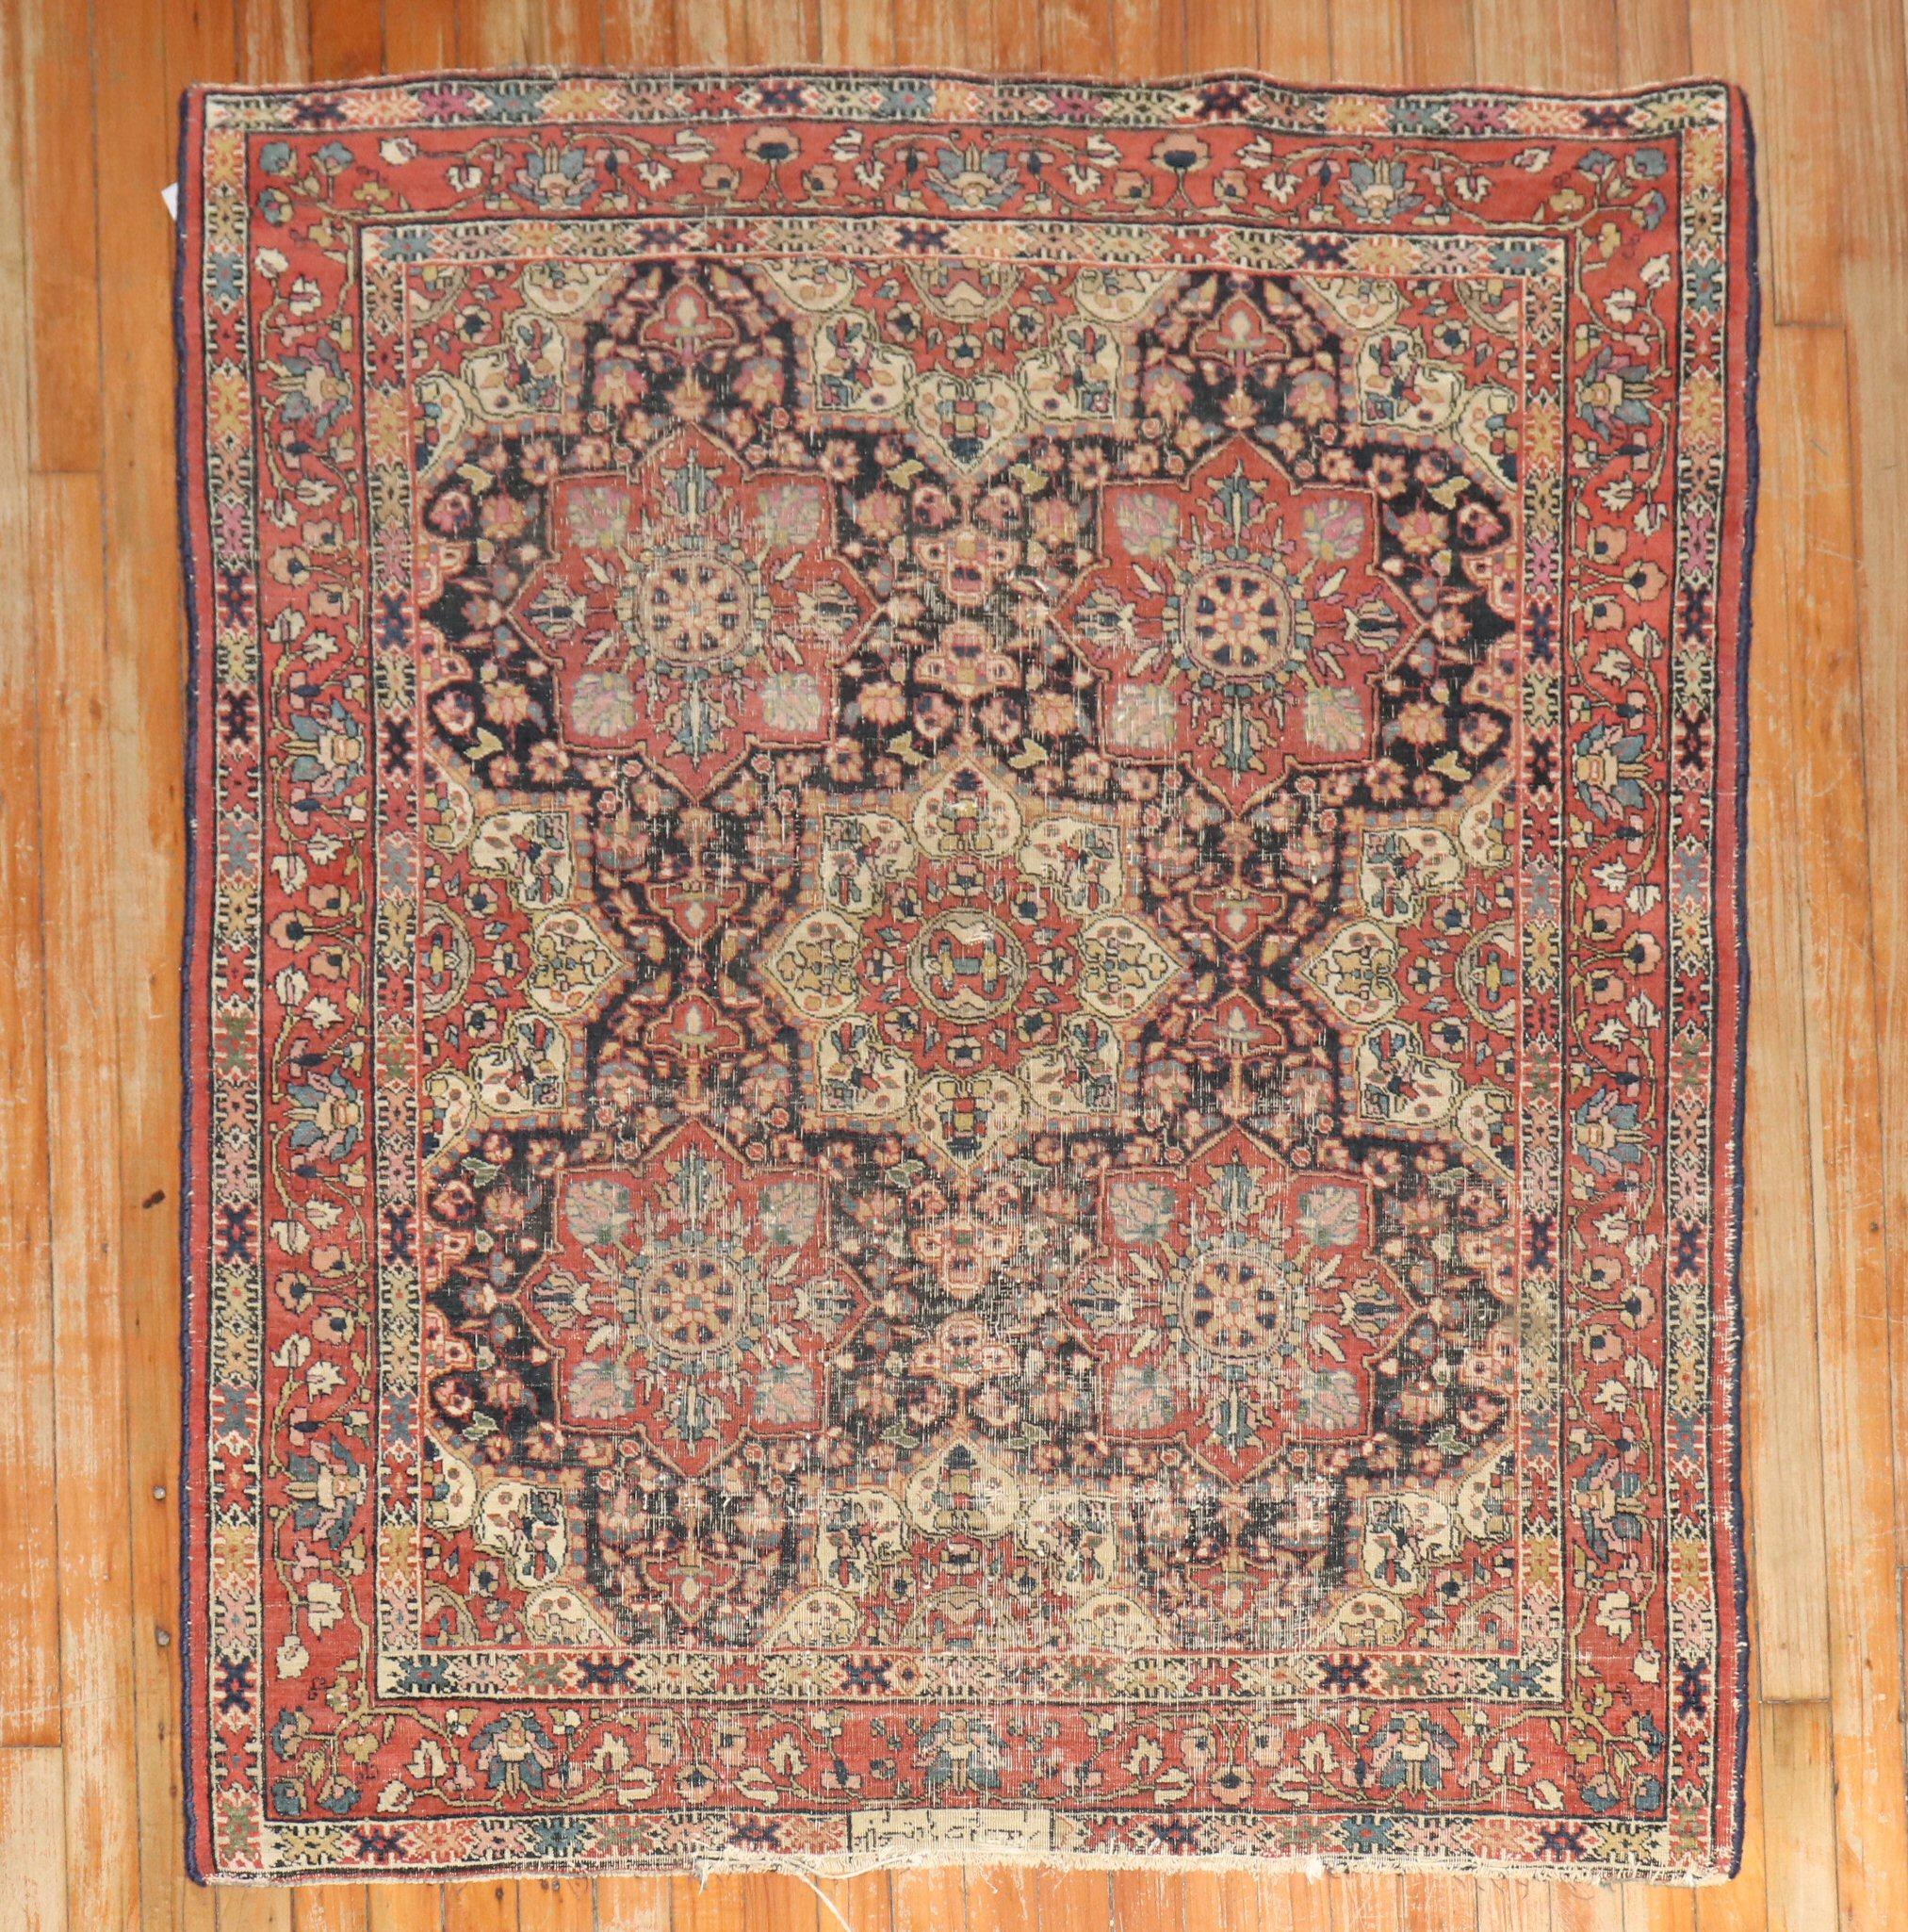 Late 19th Century Worn Persian Rug signed by weaver

Measures: 4'1